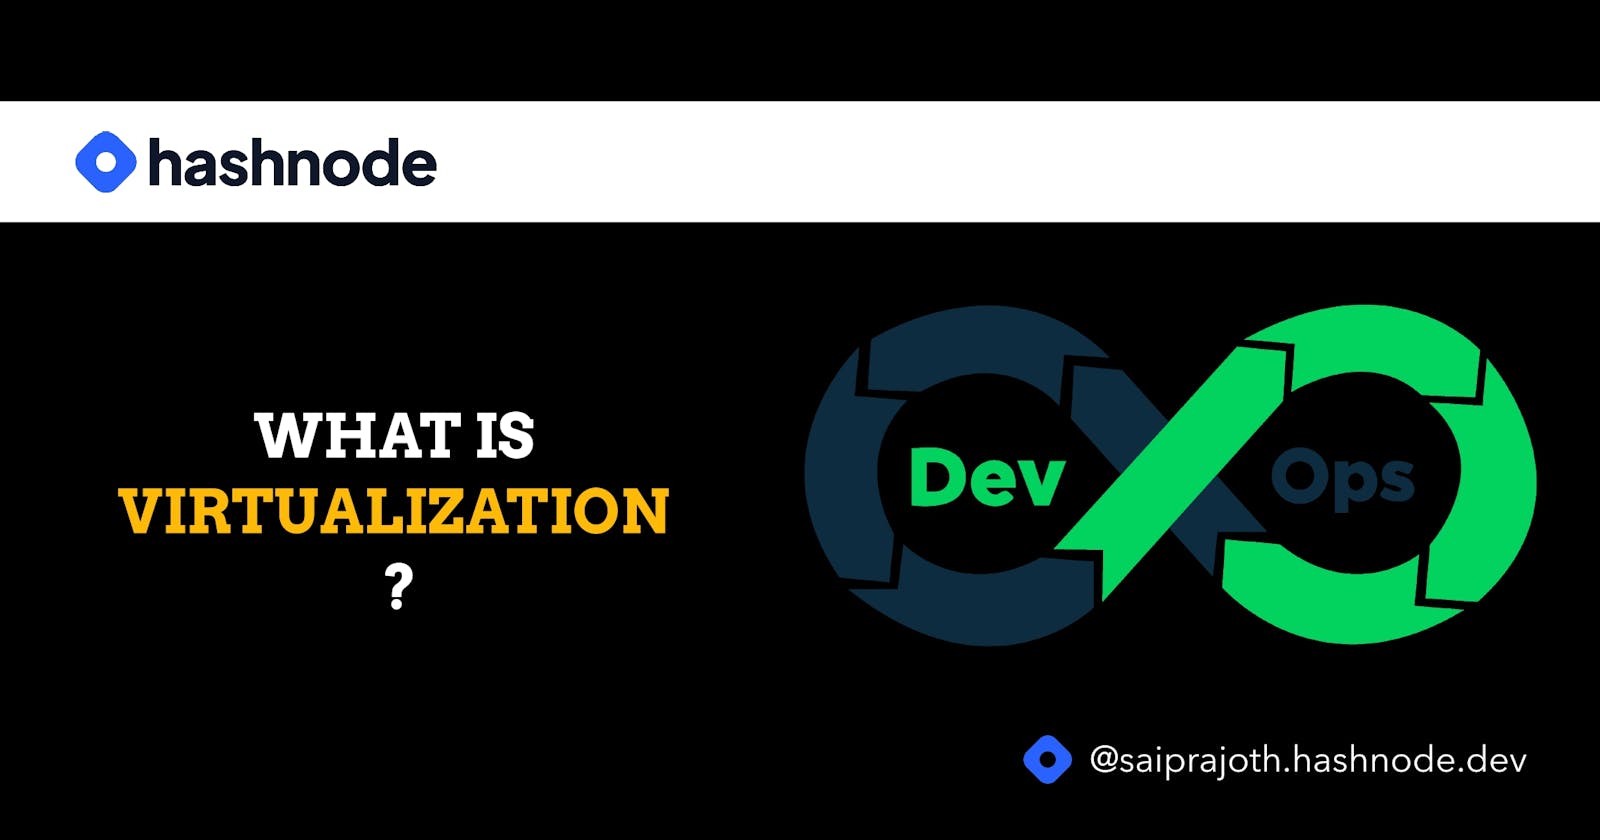 What is Virtualization?